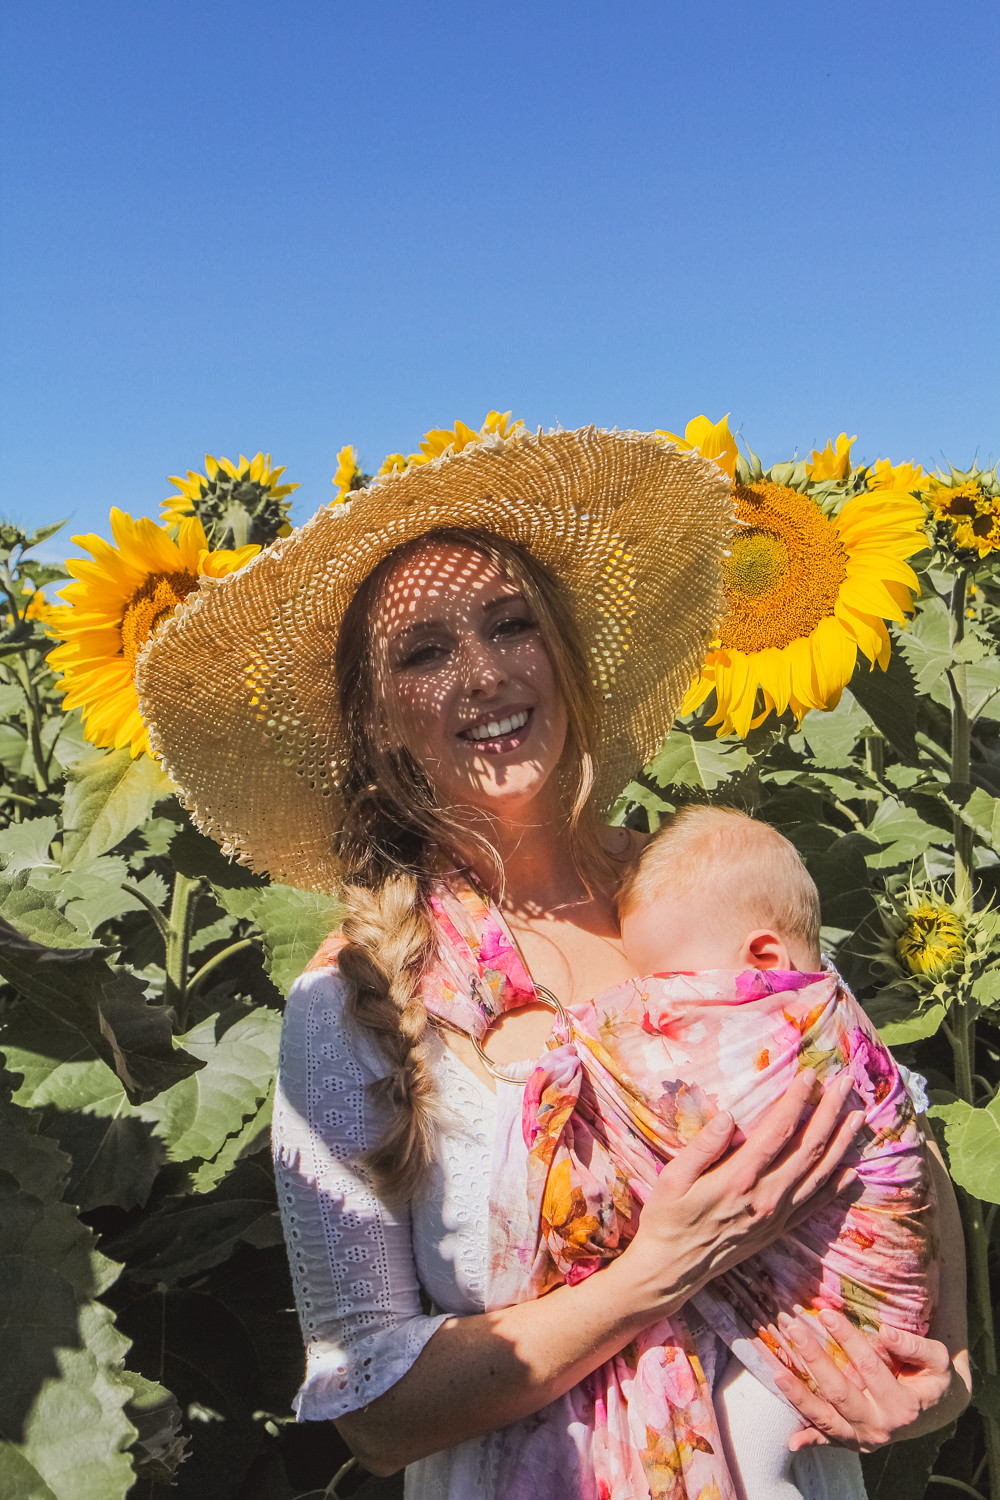 Goldfields Girl at sunflower farm in Ballarat in Victoria. Wearing white eyelet dress, straw hat and ping ring sling baby carrier.